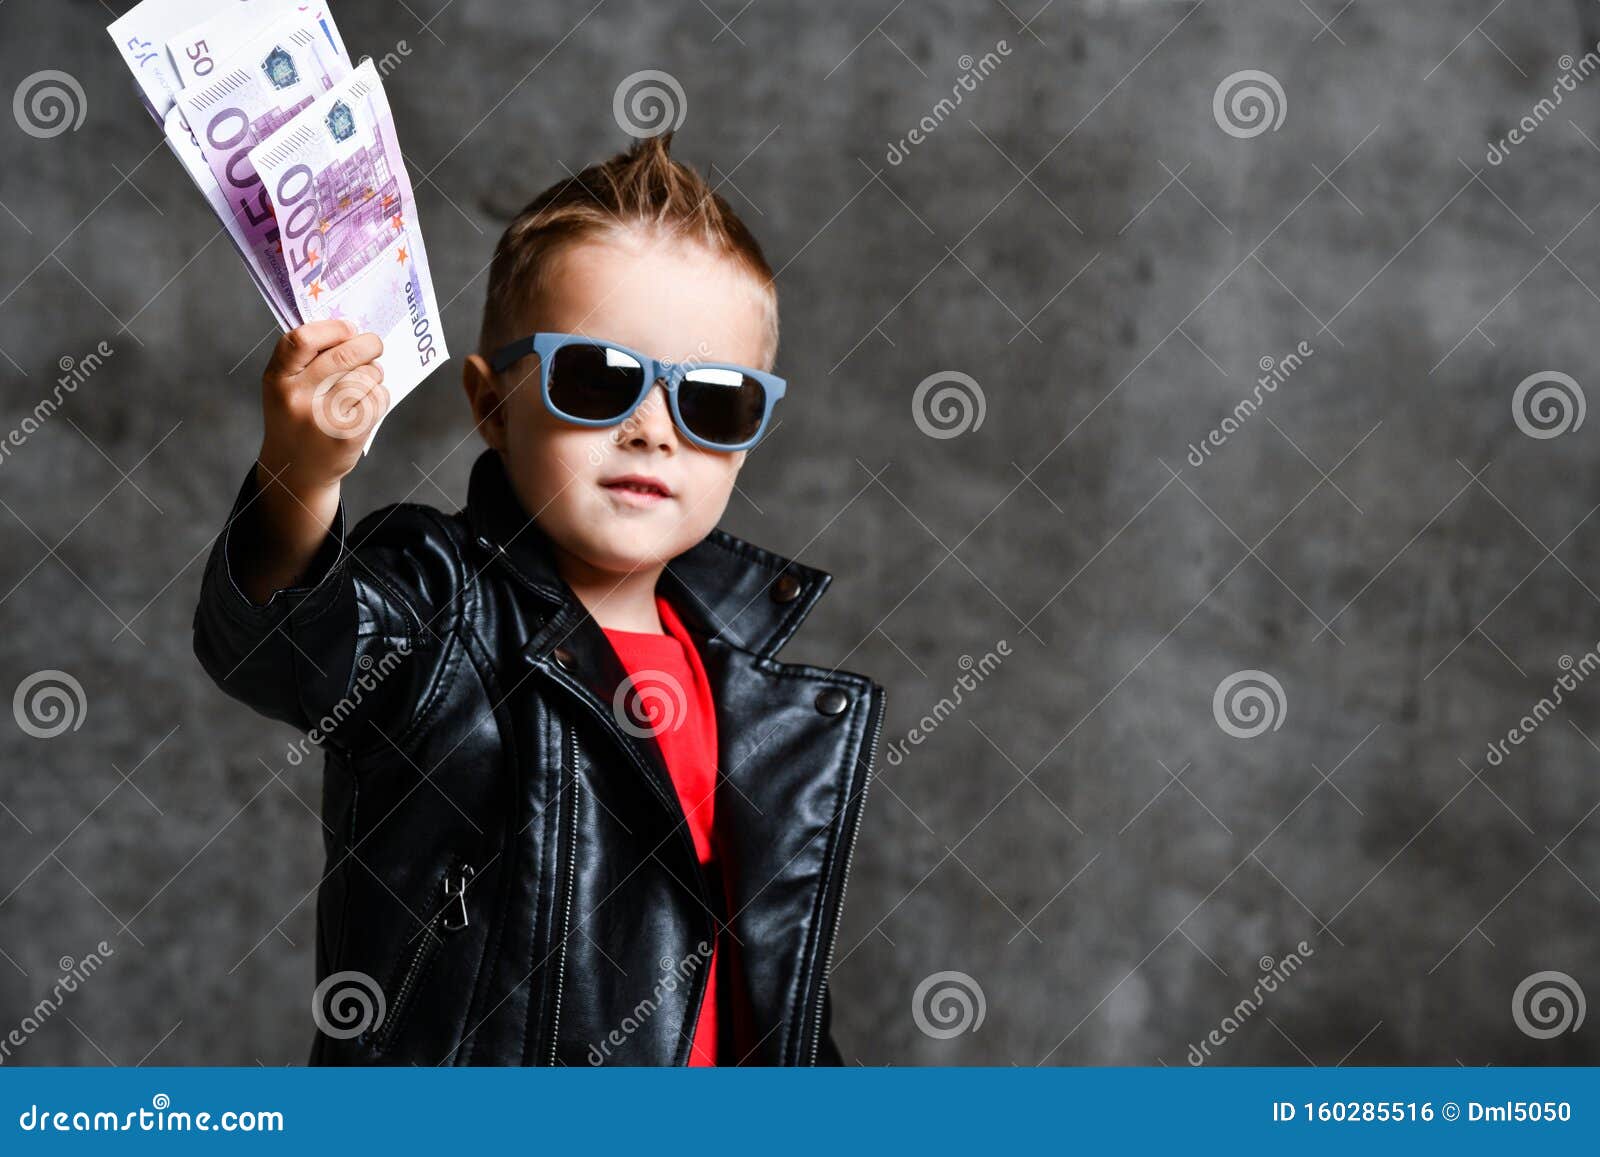 happy rich kid boy millionaire in fashion sunglasses hold stack of 500 euro money cash in leather jacket and red t-shirt